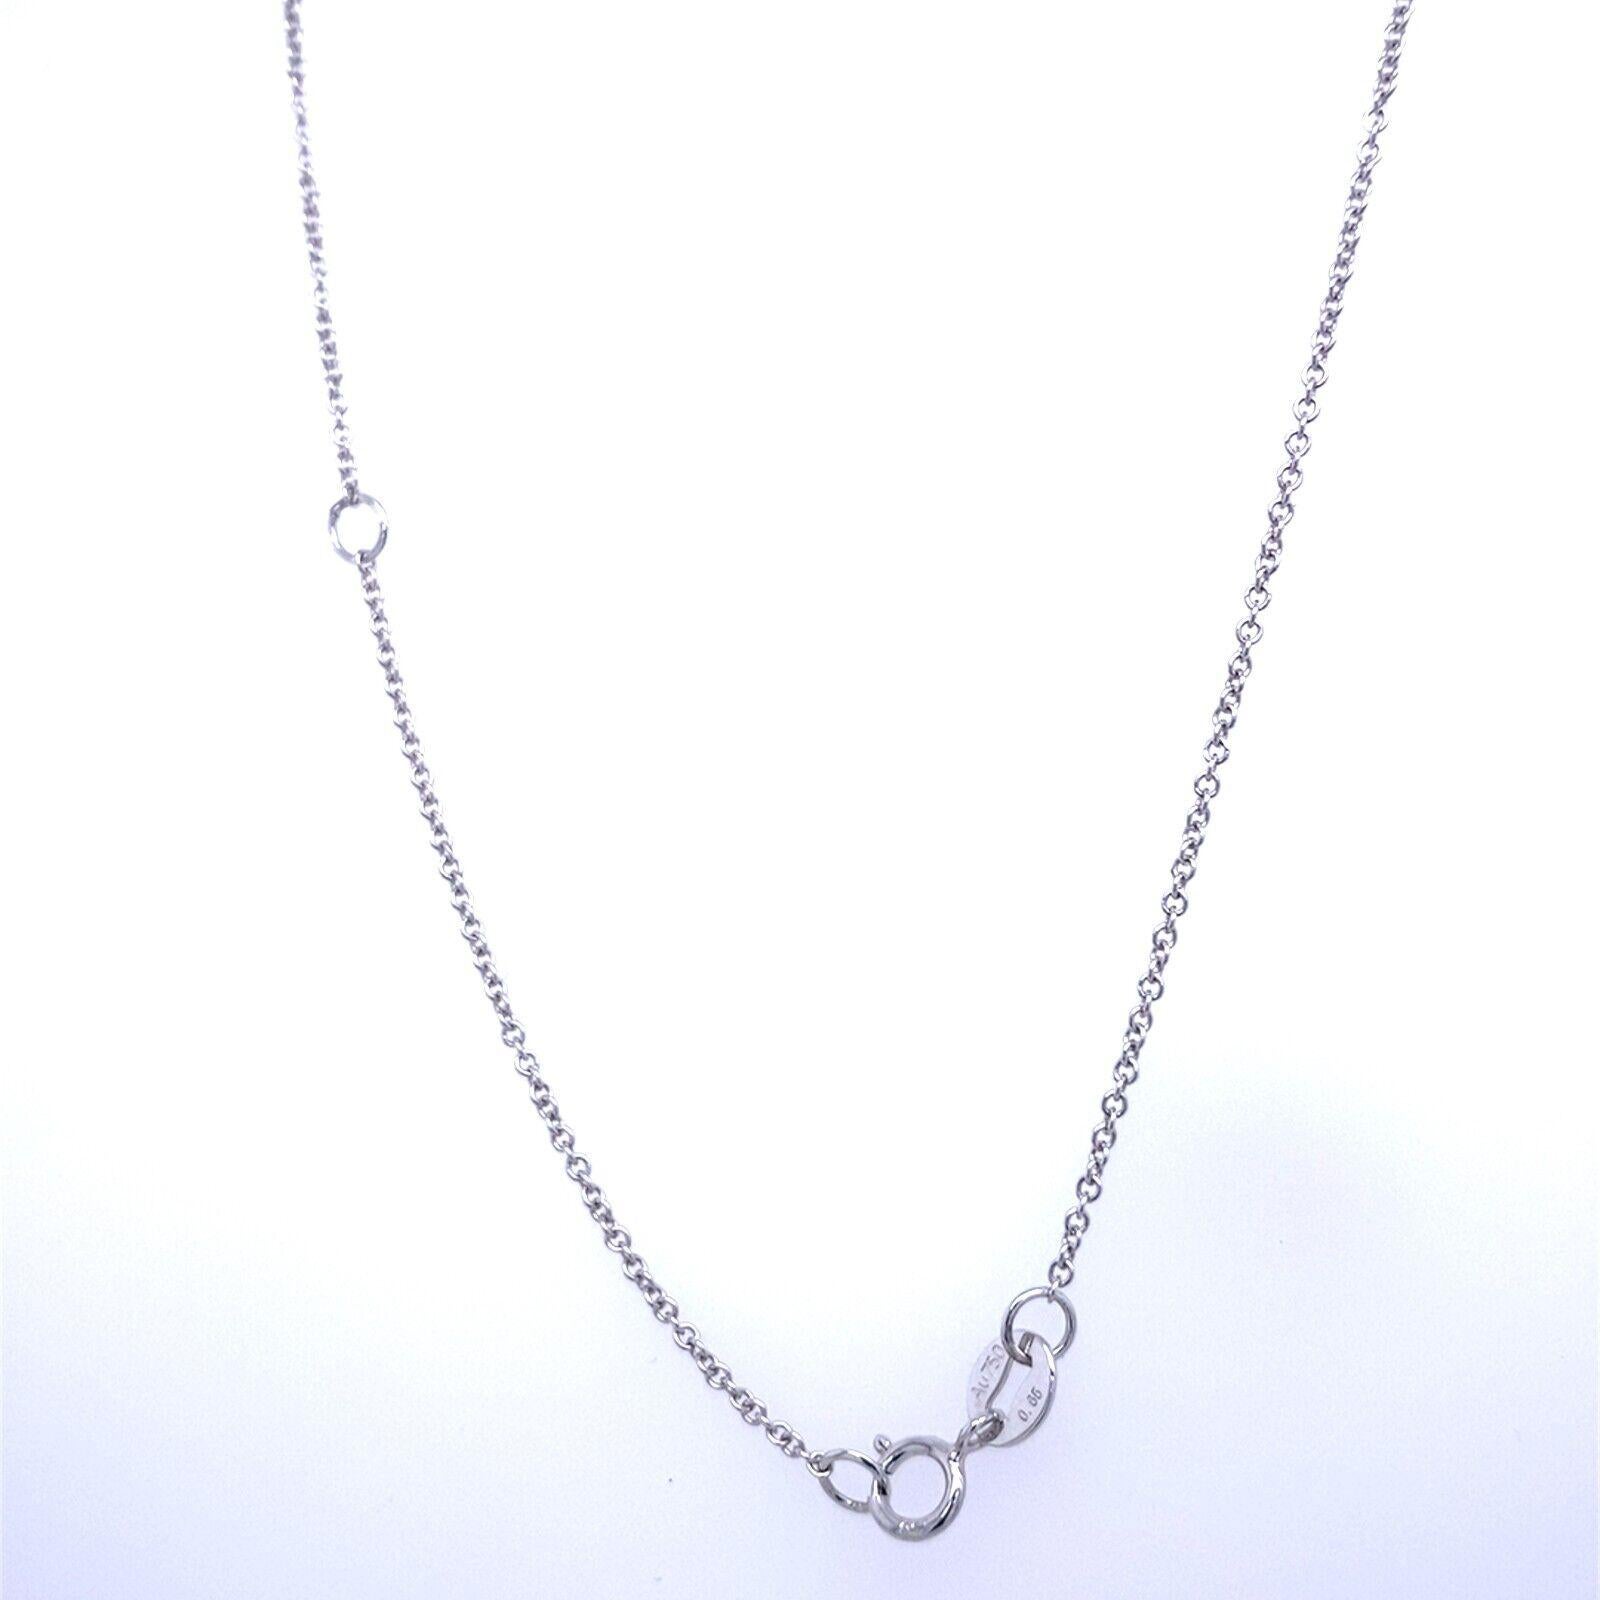 Rose Cut Floating Diamond Necklace Set in 18ct White Gold In New Condition For Sale In London, GB